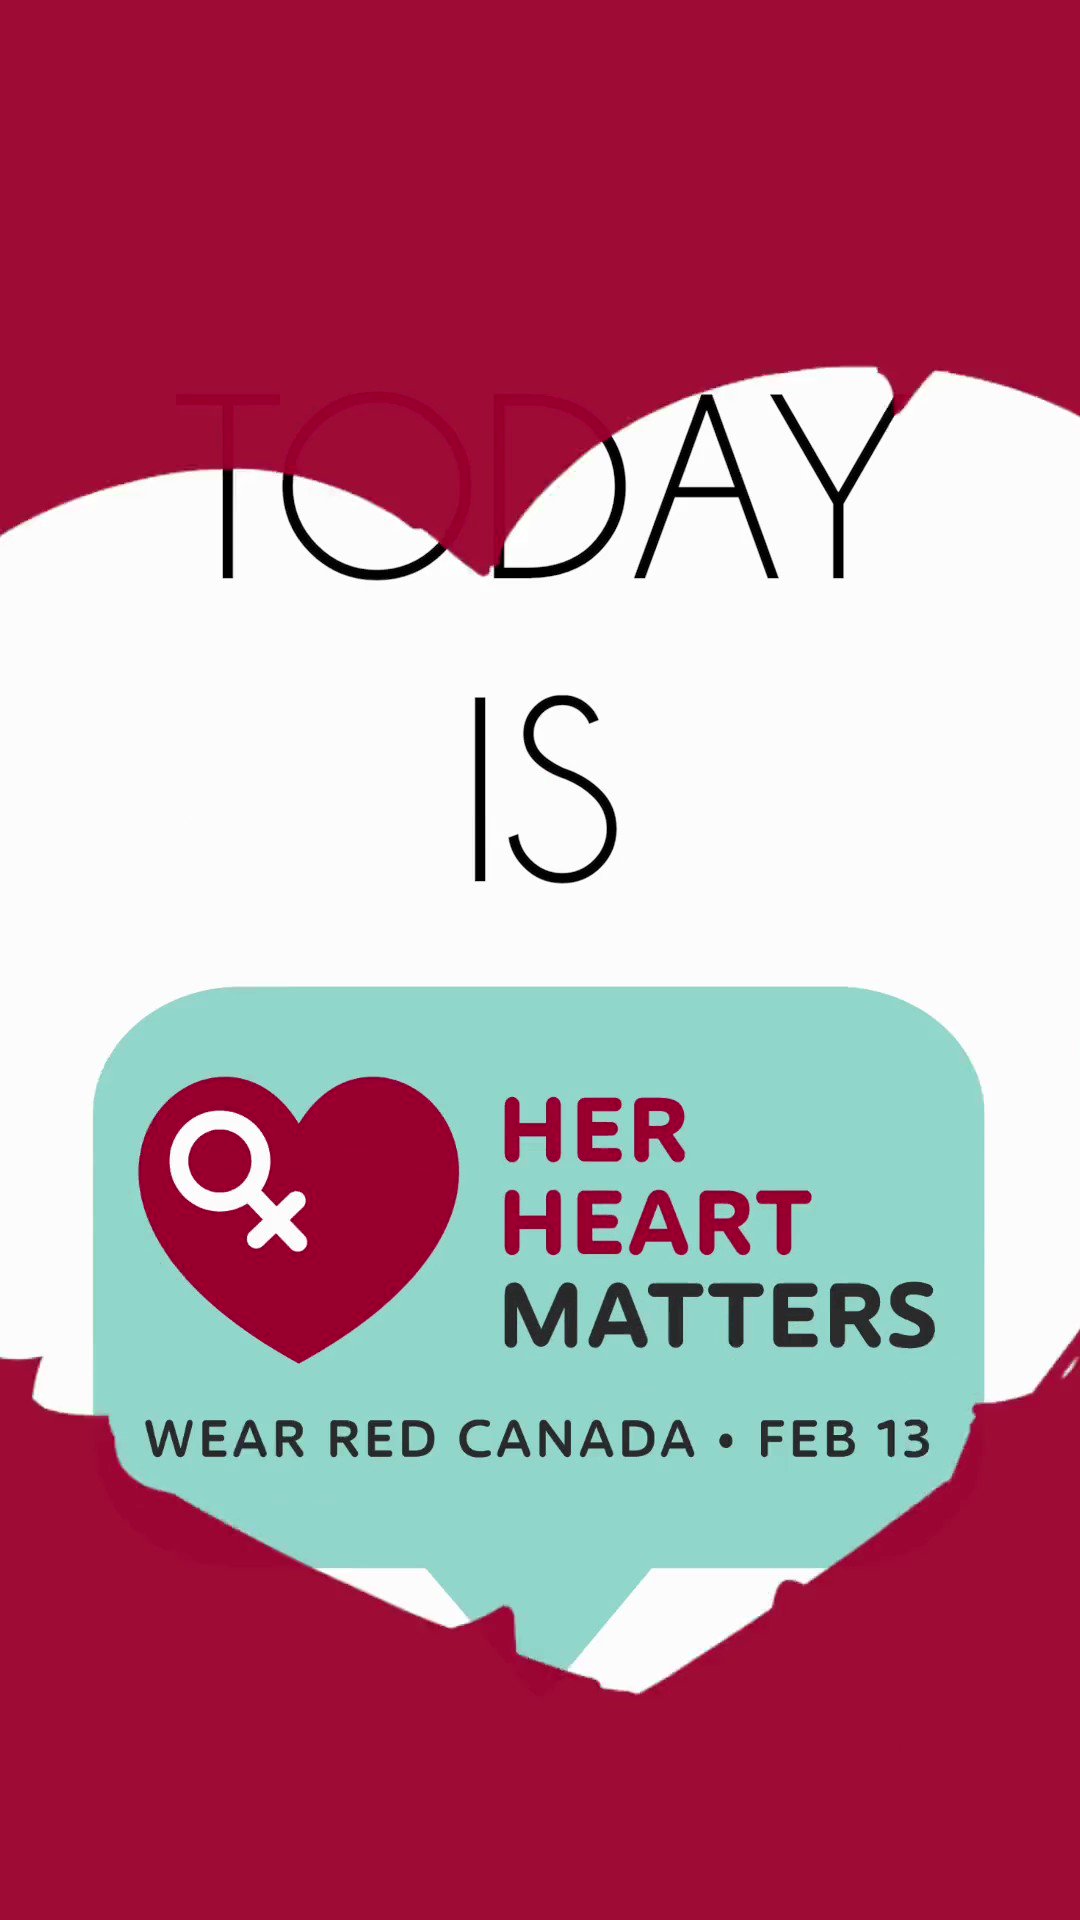 Canadian Women's Heart Health Alliance (CWHHA) on X: ❤️Today is